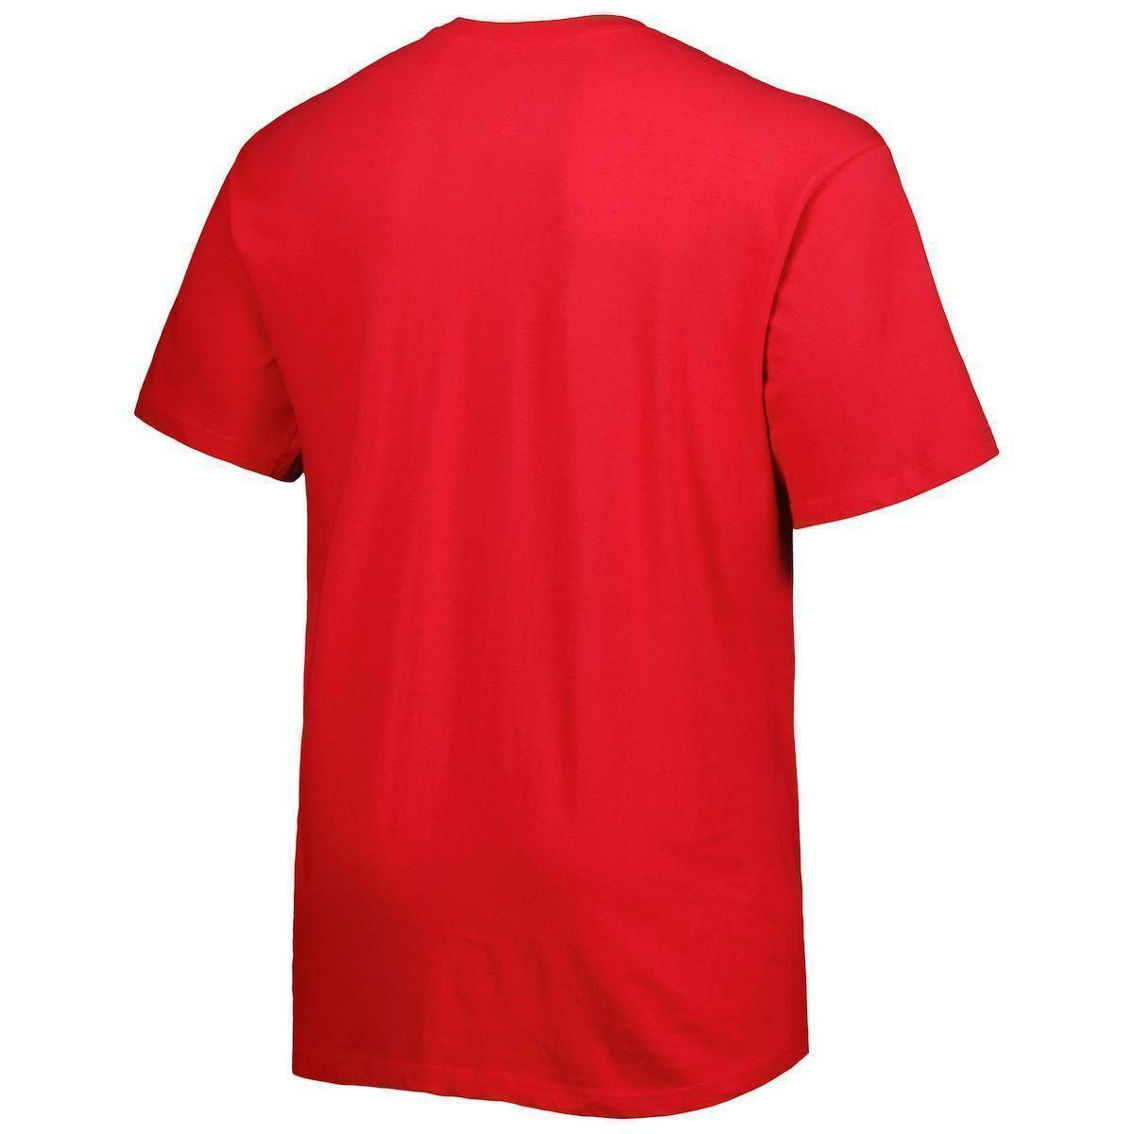 Profile Men's Red LA Clippers Big & Tall Heart & Soul T-Shirt - Image 4 of 4